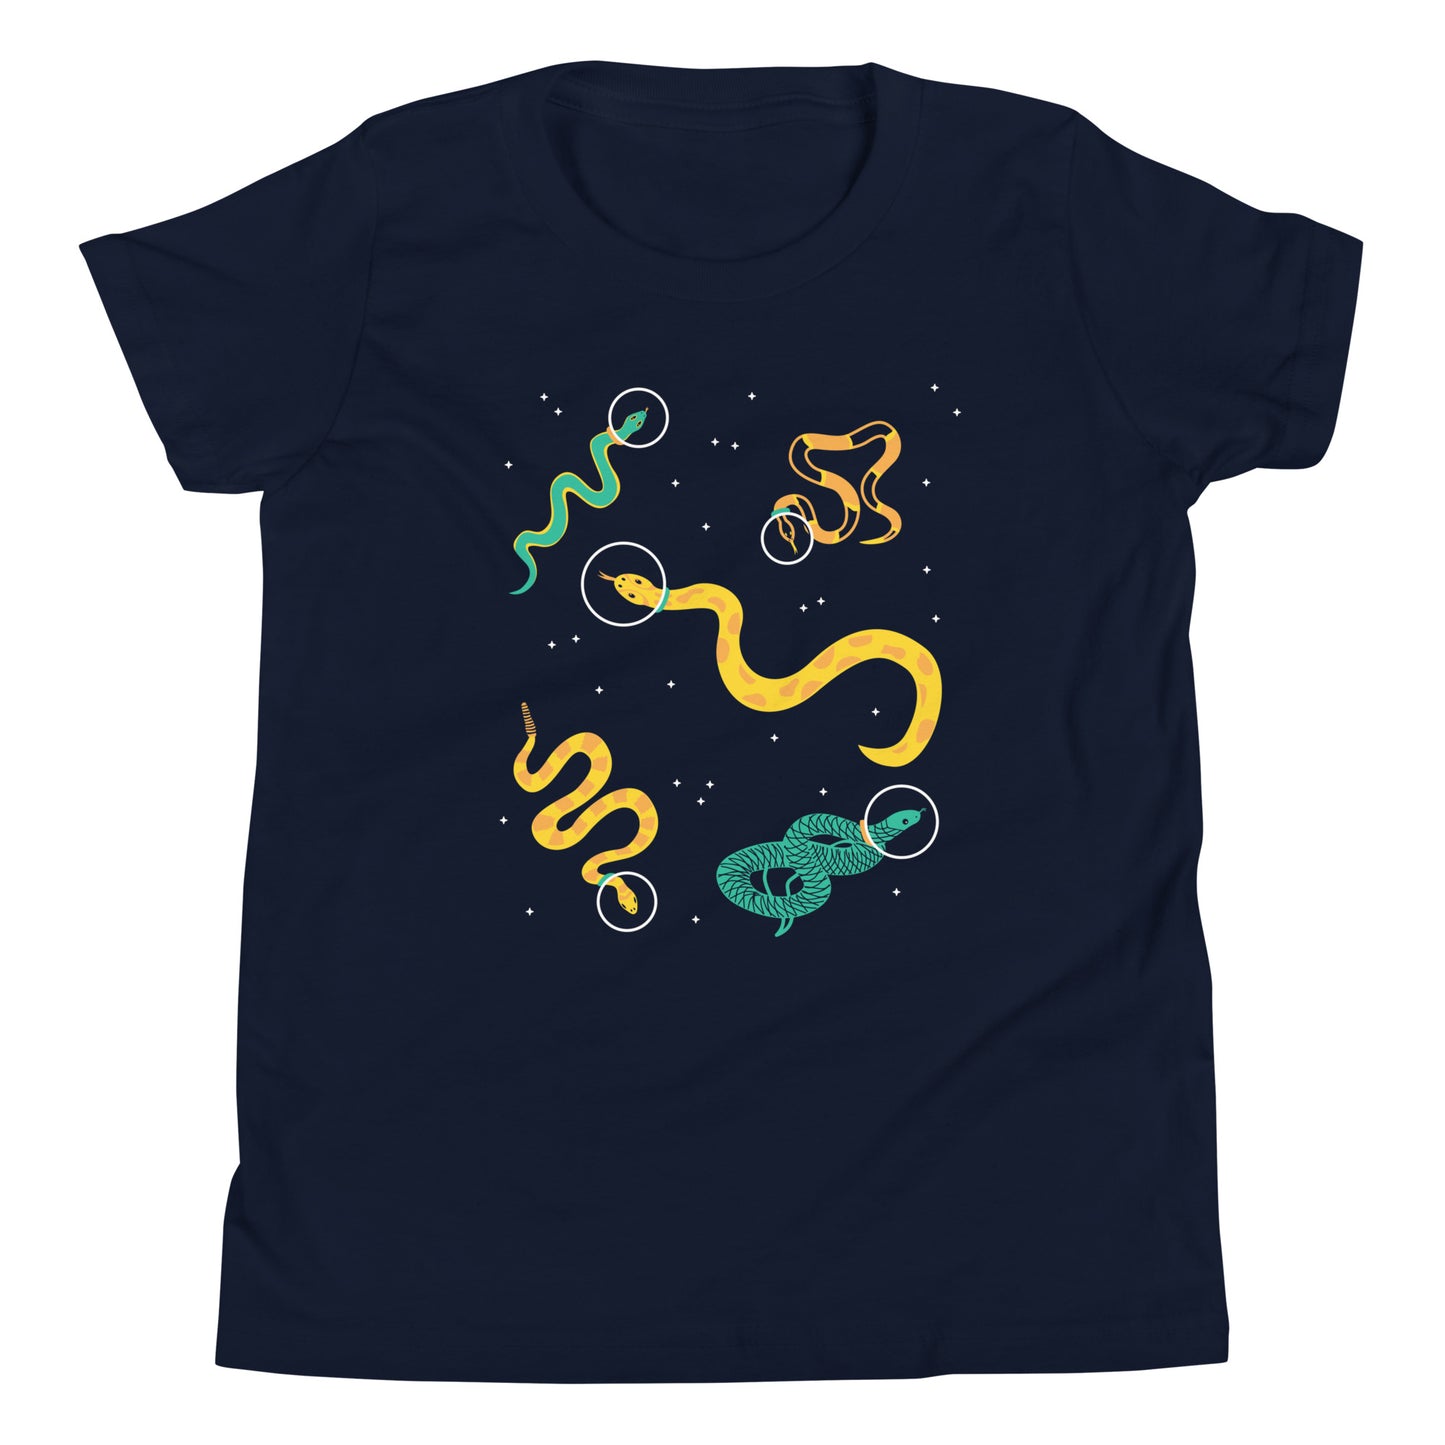 Snakes In Space Kid's Youth Tee